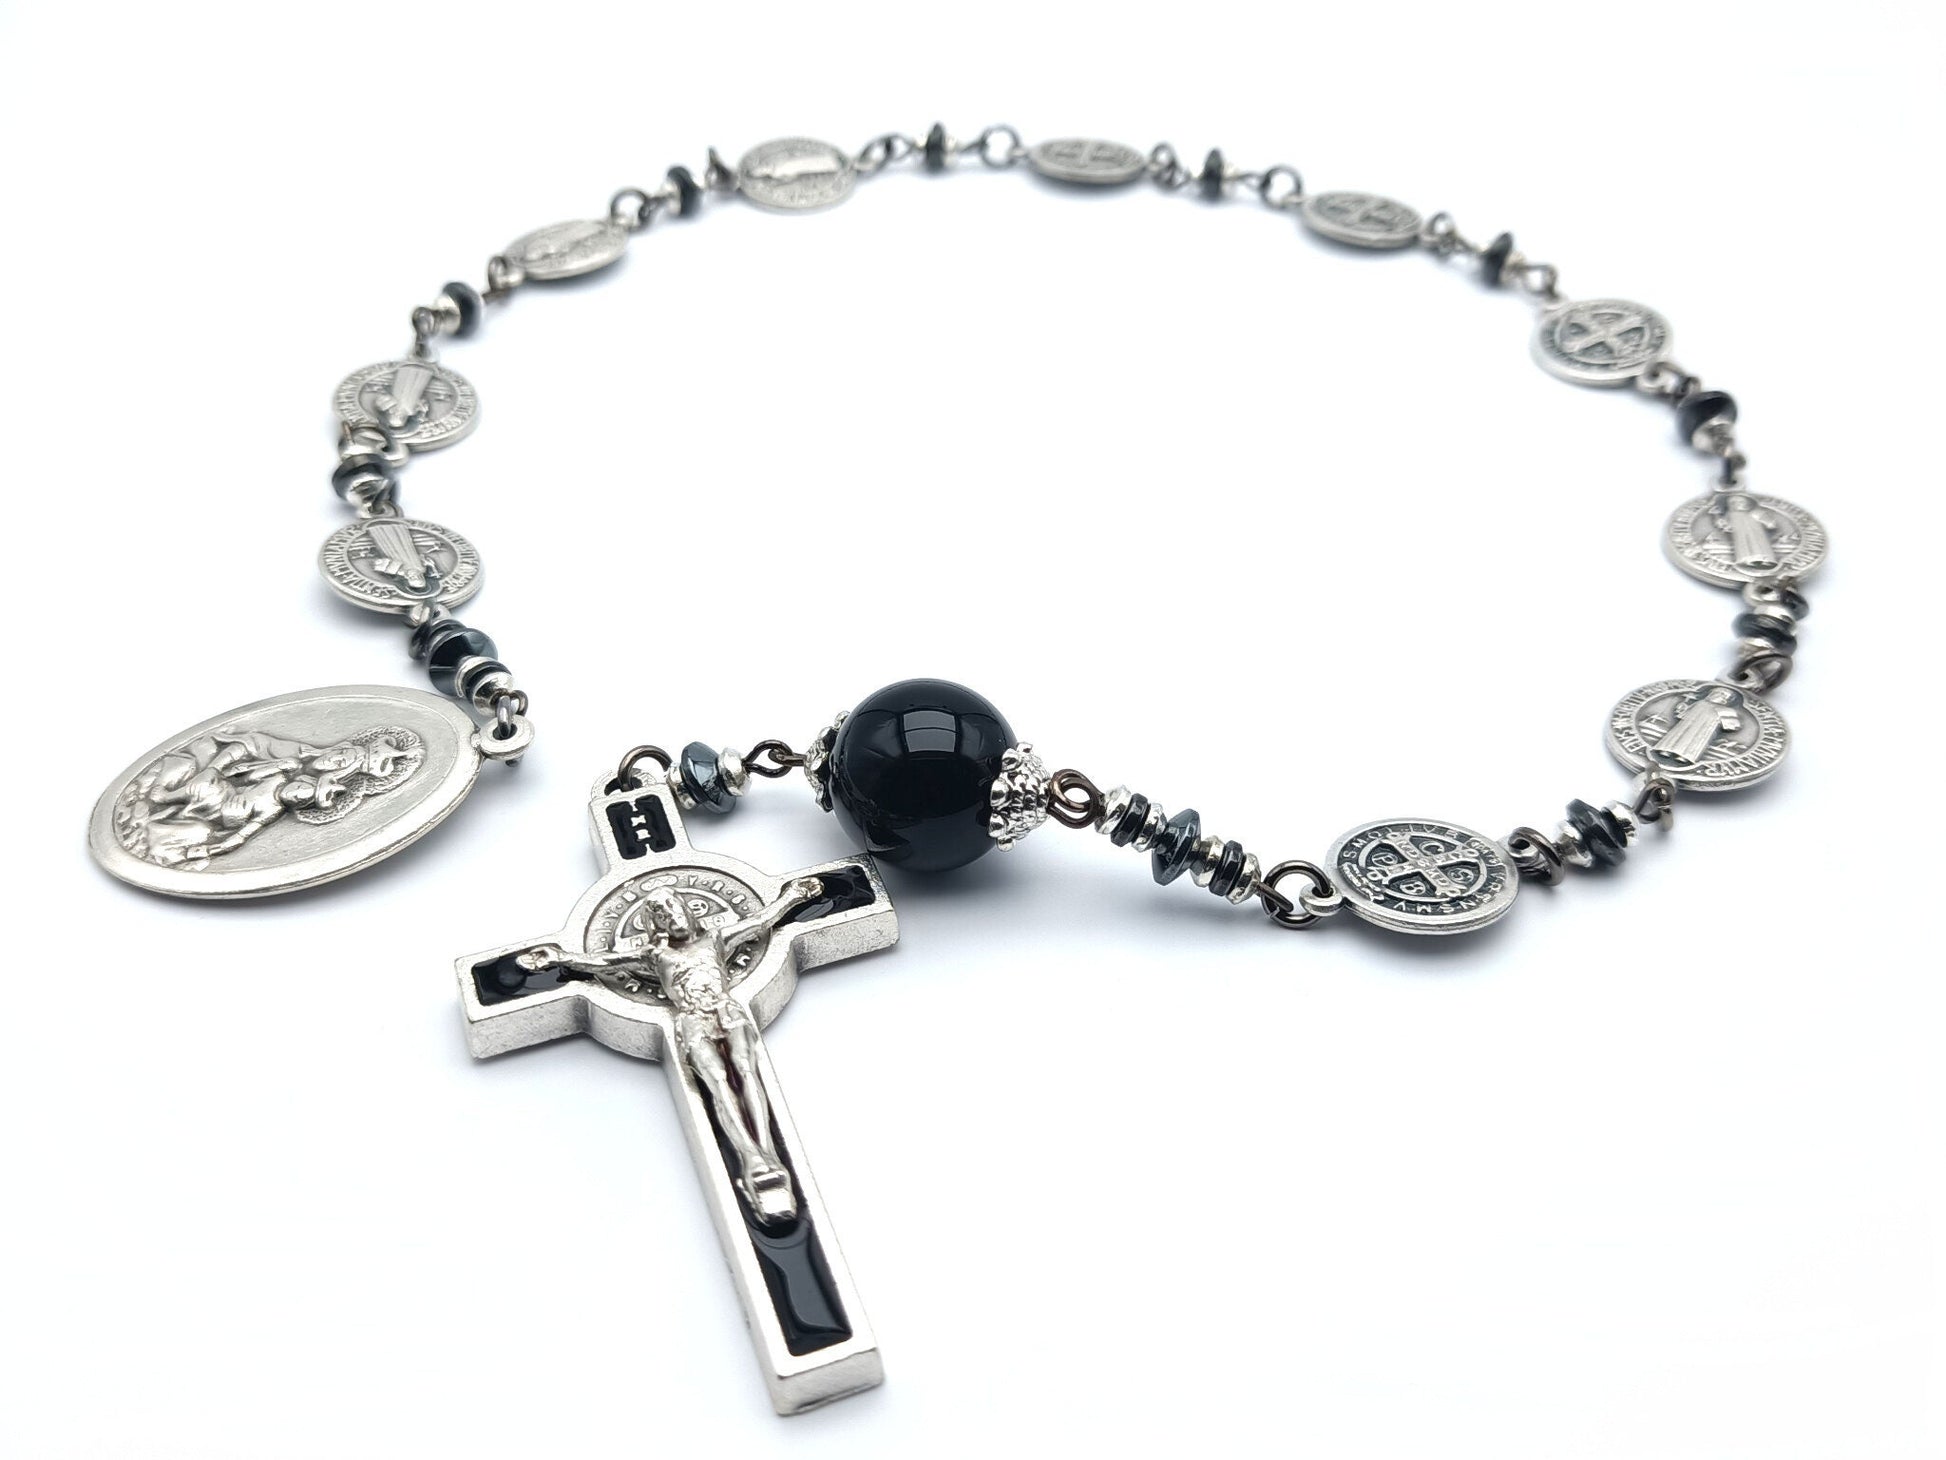 Saint Benedict unique rosary beads single decade or tenner rosary with silver Saint benedict medal beads, onyx pater bead, silver and black enamel crucifix and Our Lady of Mount Carmel medal.